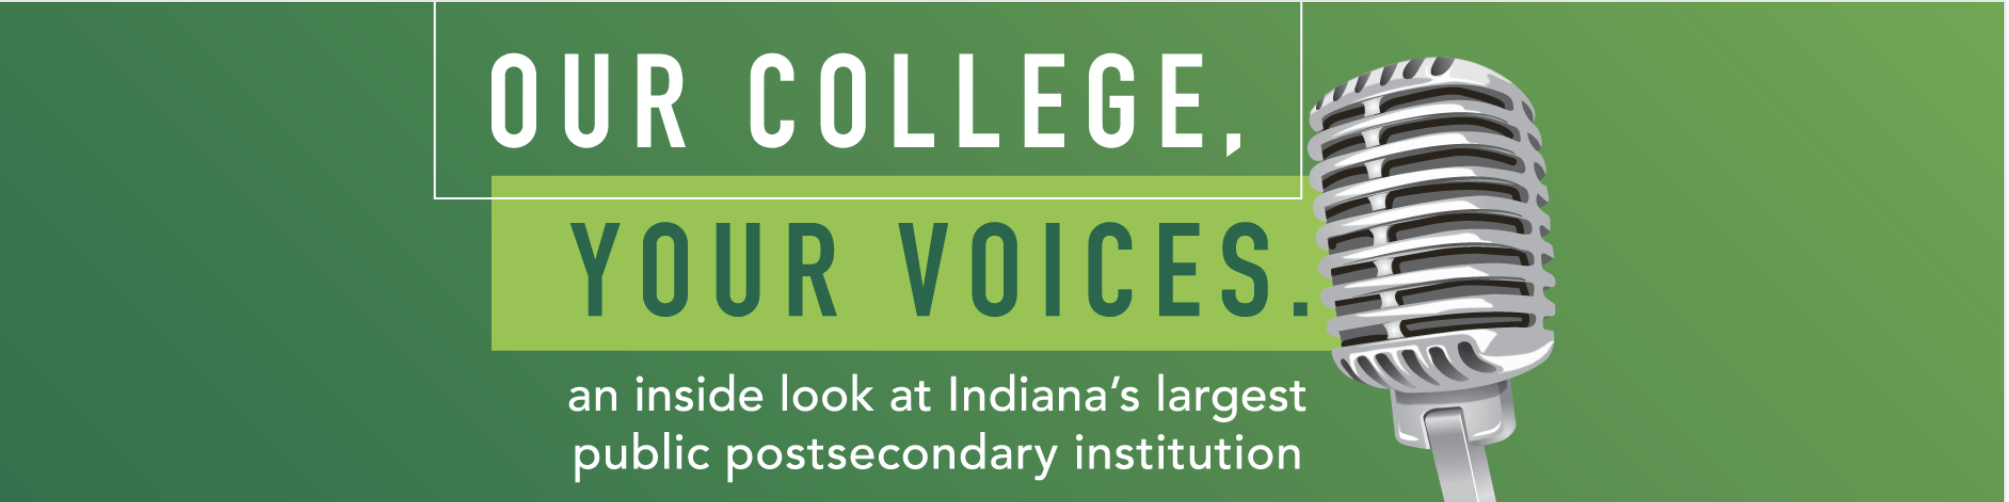 Our College Your Voices Podcast